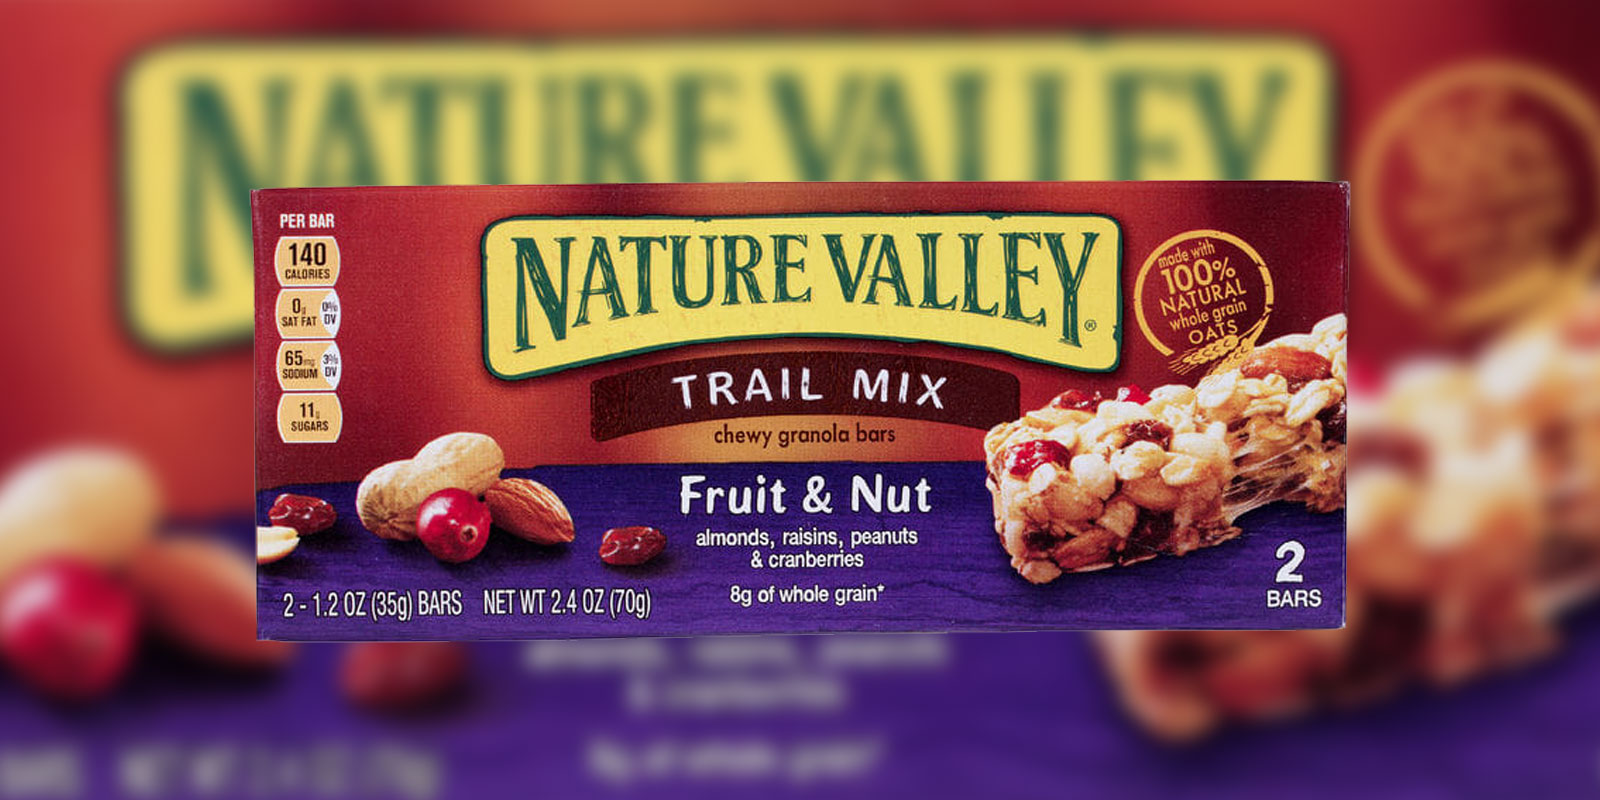 General Mills Settles Lawsuit Over Nature Valley Glyphosate Claims